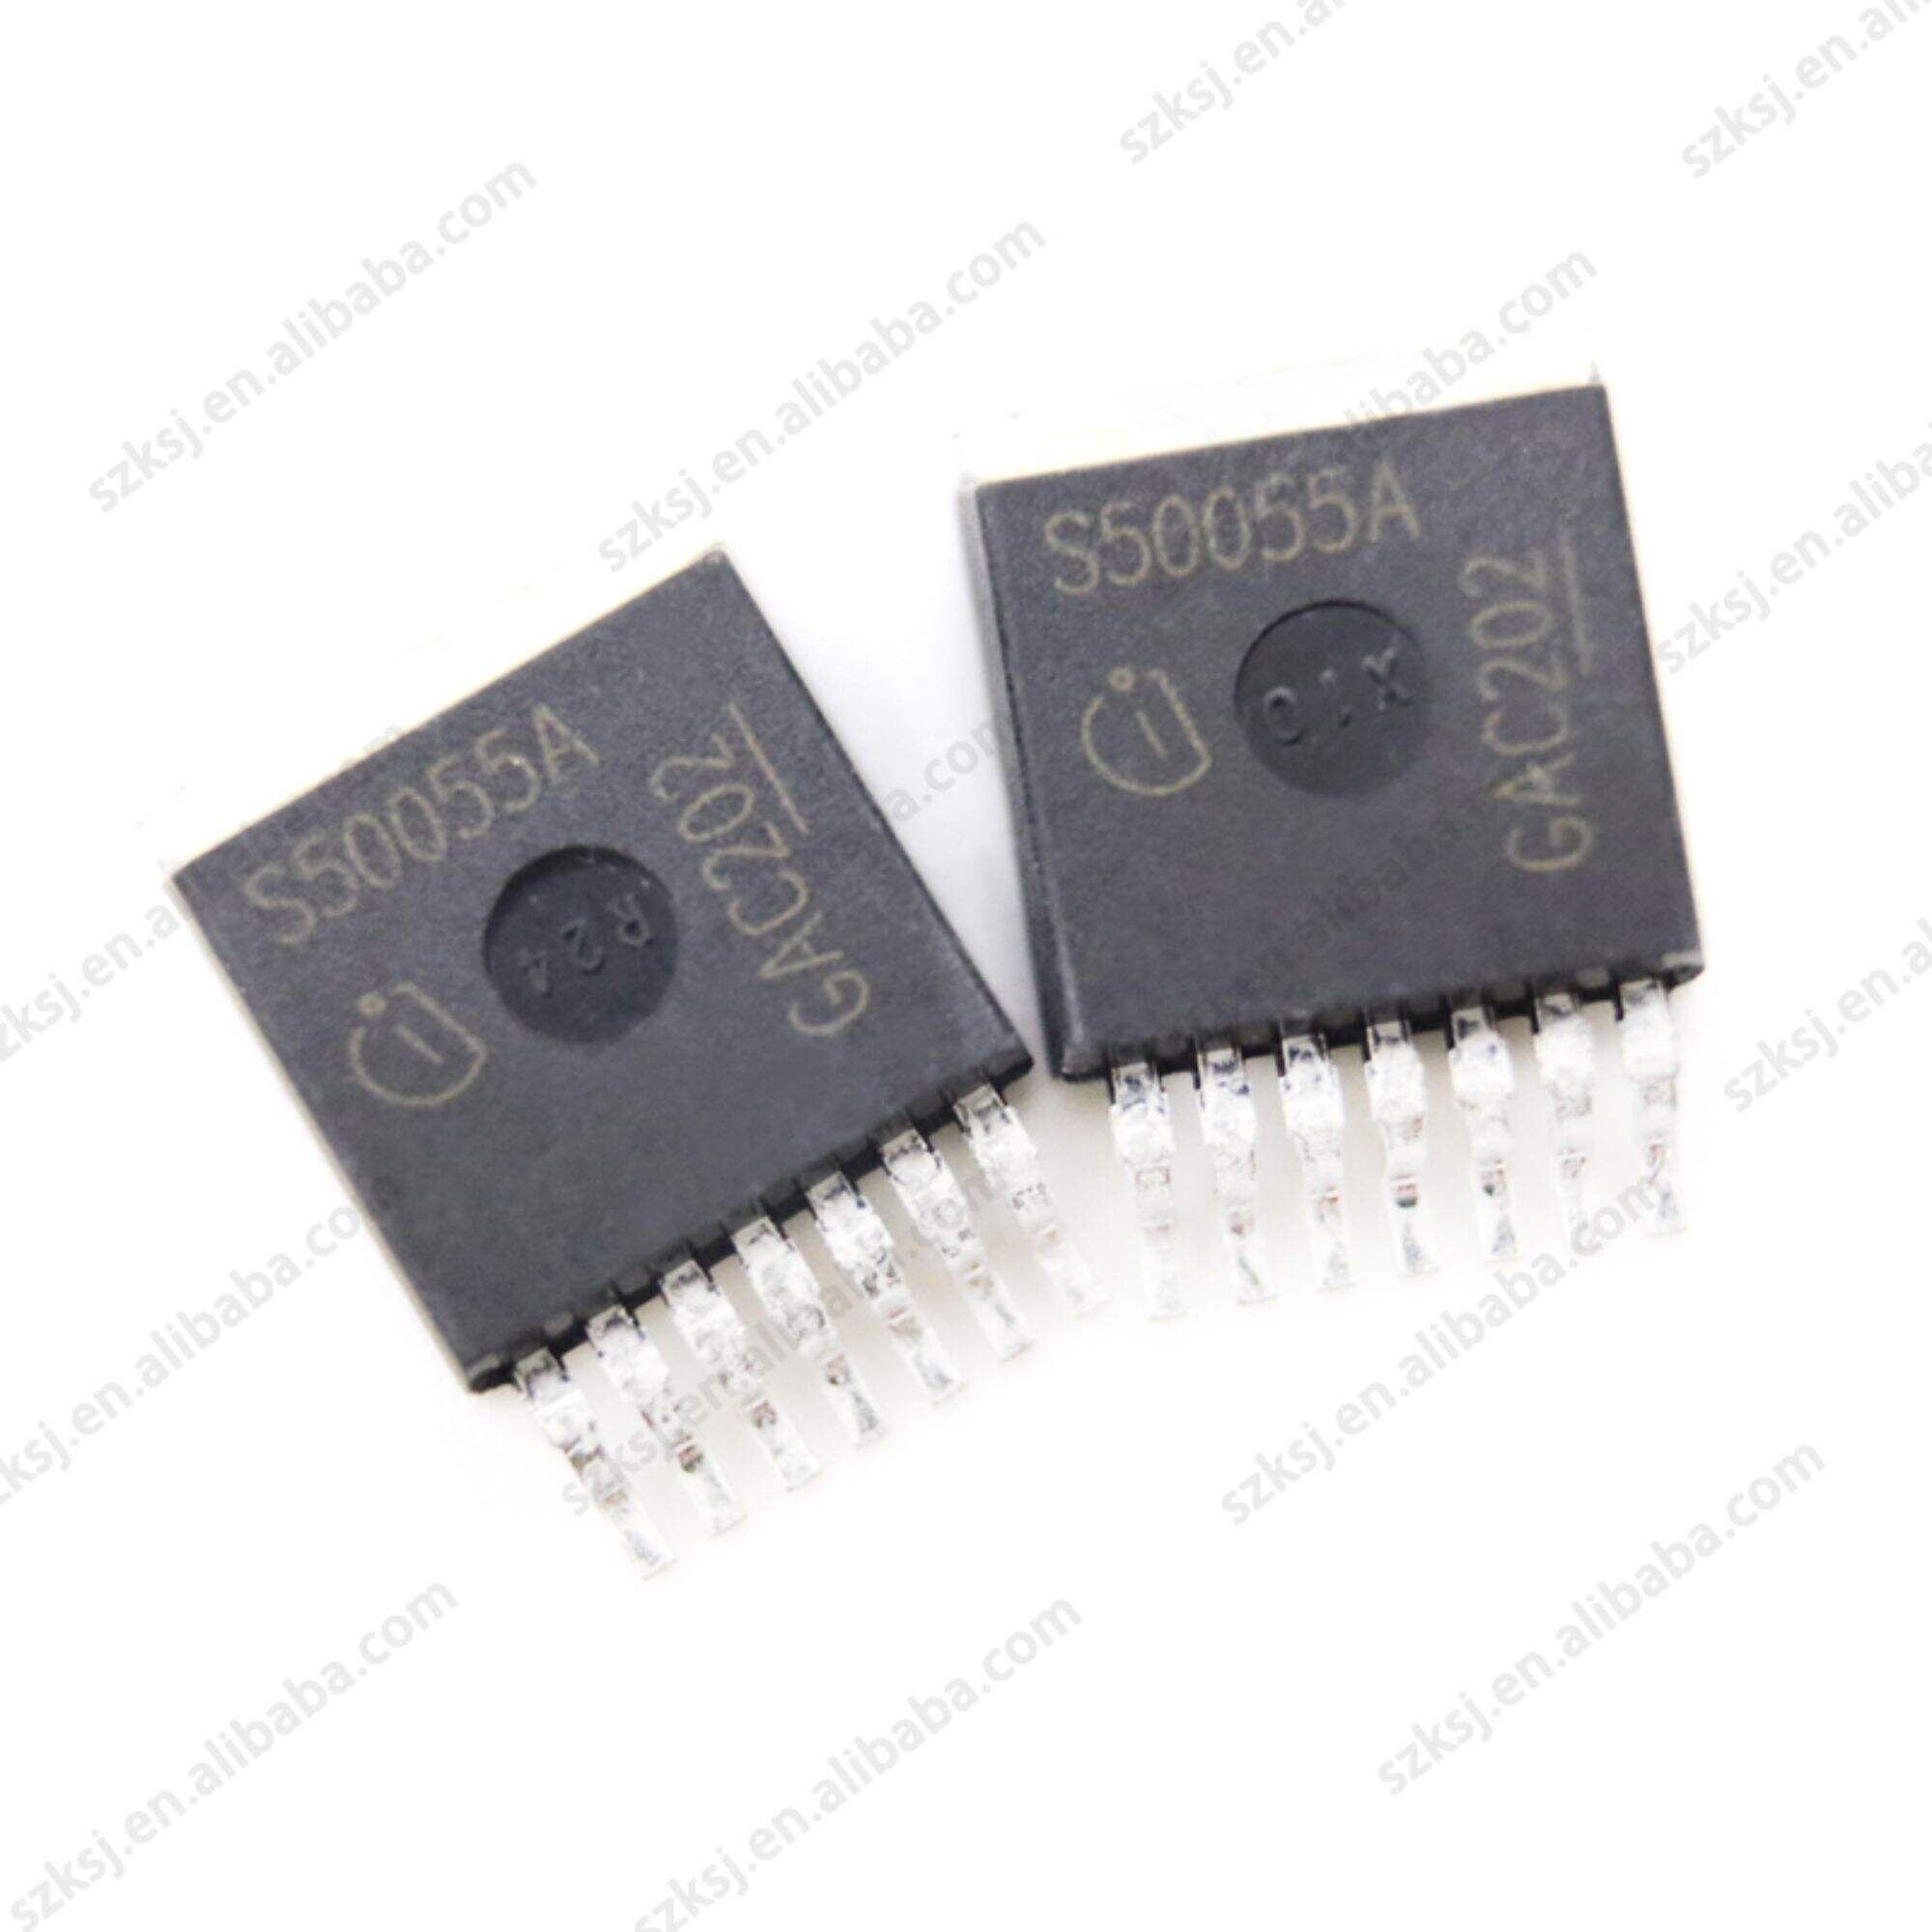 BTS500551TMAATMA1 BTS50055A new original stock power electronic switch IC chip PG-TO220-7-4 IC